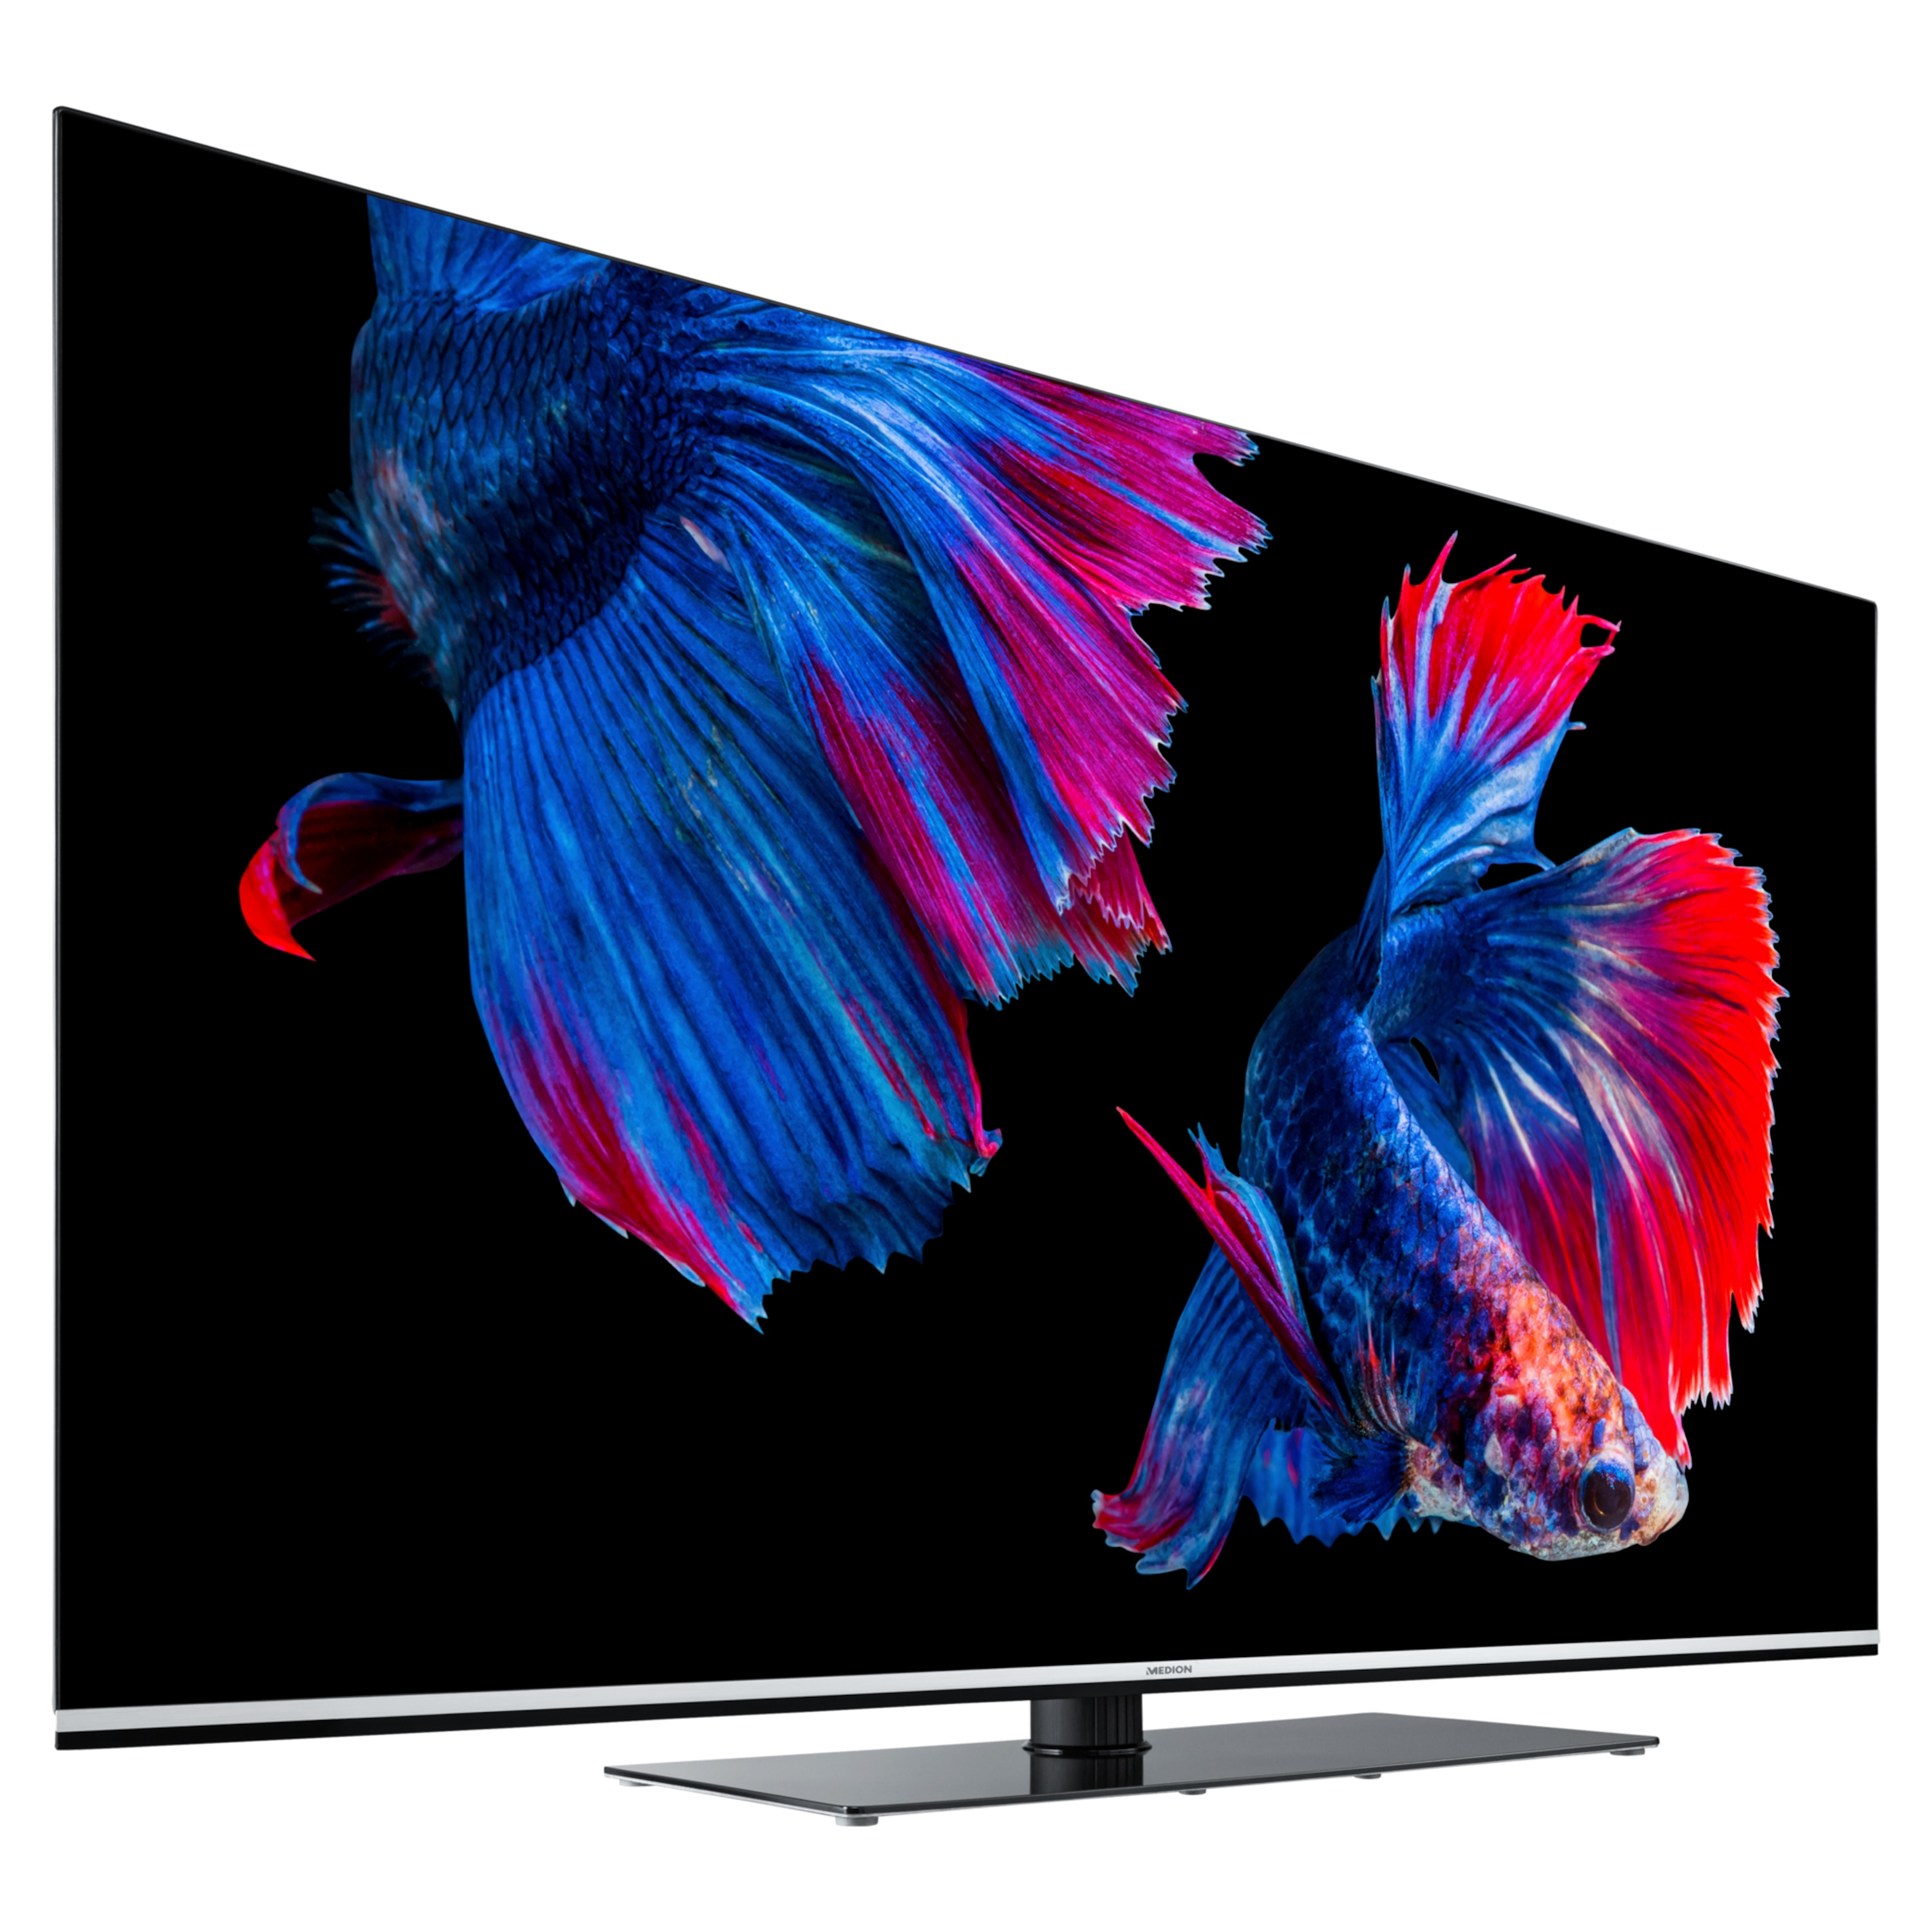 MEDION® LIFE® X15564 (MD 32355) OLED Smart-TV, 138,8 cm (55'') Ultra HD Display, HDR, Dolby Vision®, Dolby Atmos®, Micro Dimming, MEMC, 100 Hz, PVR ready, Netflix, Amazon Prime Video, Bluetooth®, DTS HD, HD Triple Tuner, CI+ (B-Ware)